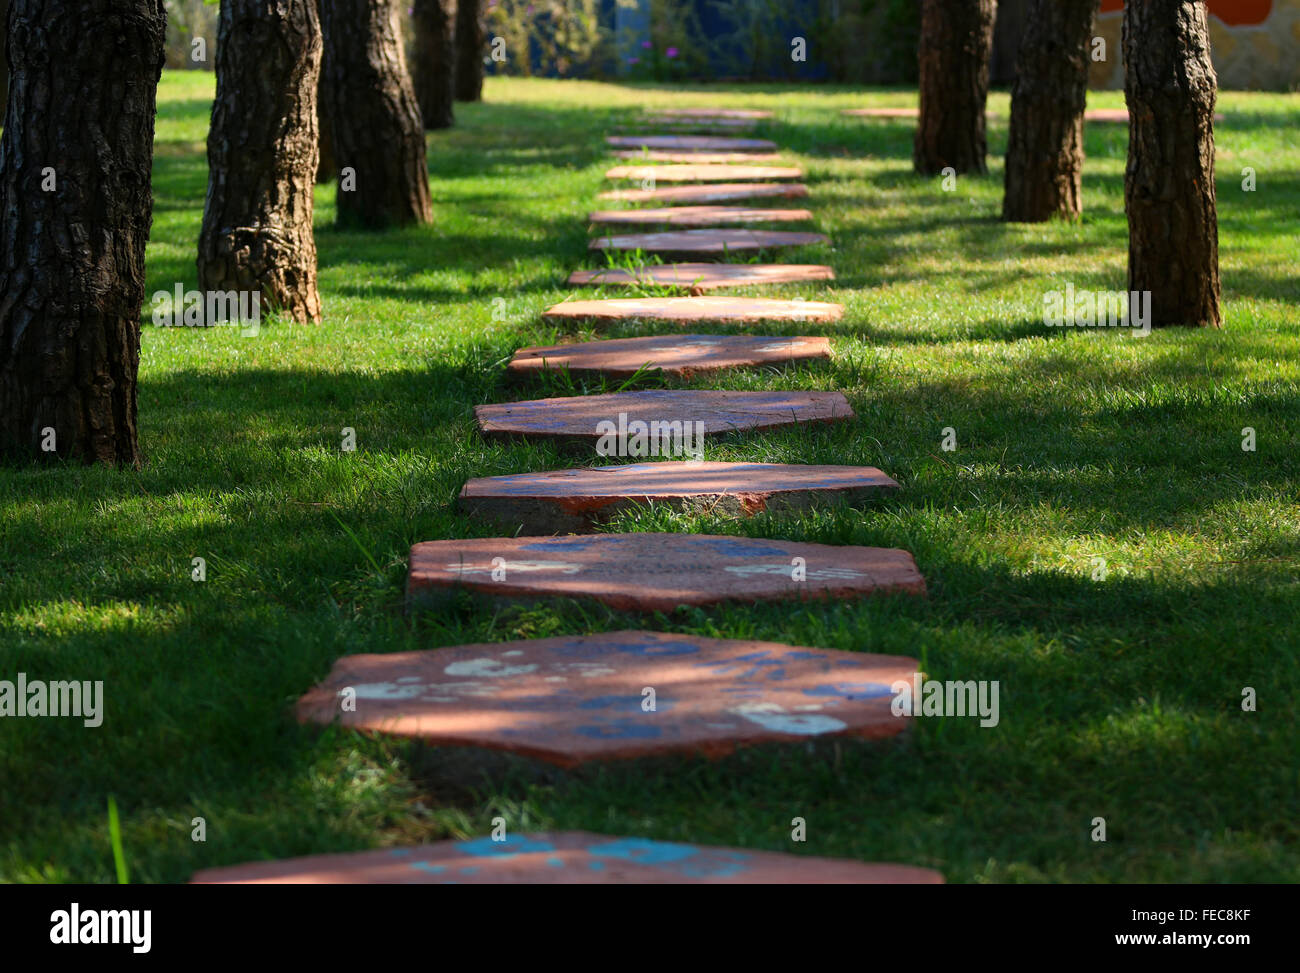 Foot path in the grass, made from concrete plates. Stock Photo